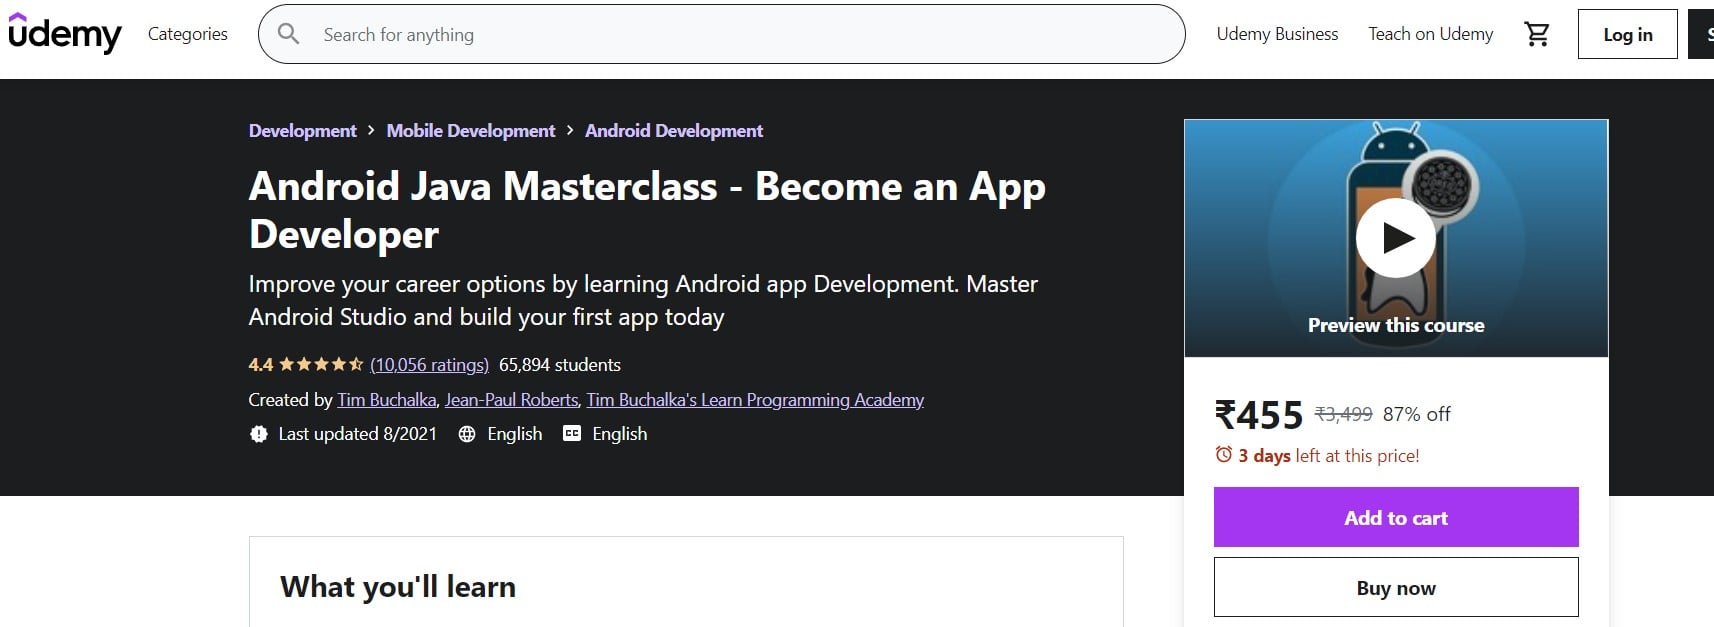 udemy Android Java Masterclass: Best Android App Development Courses 